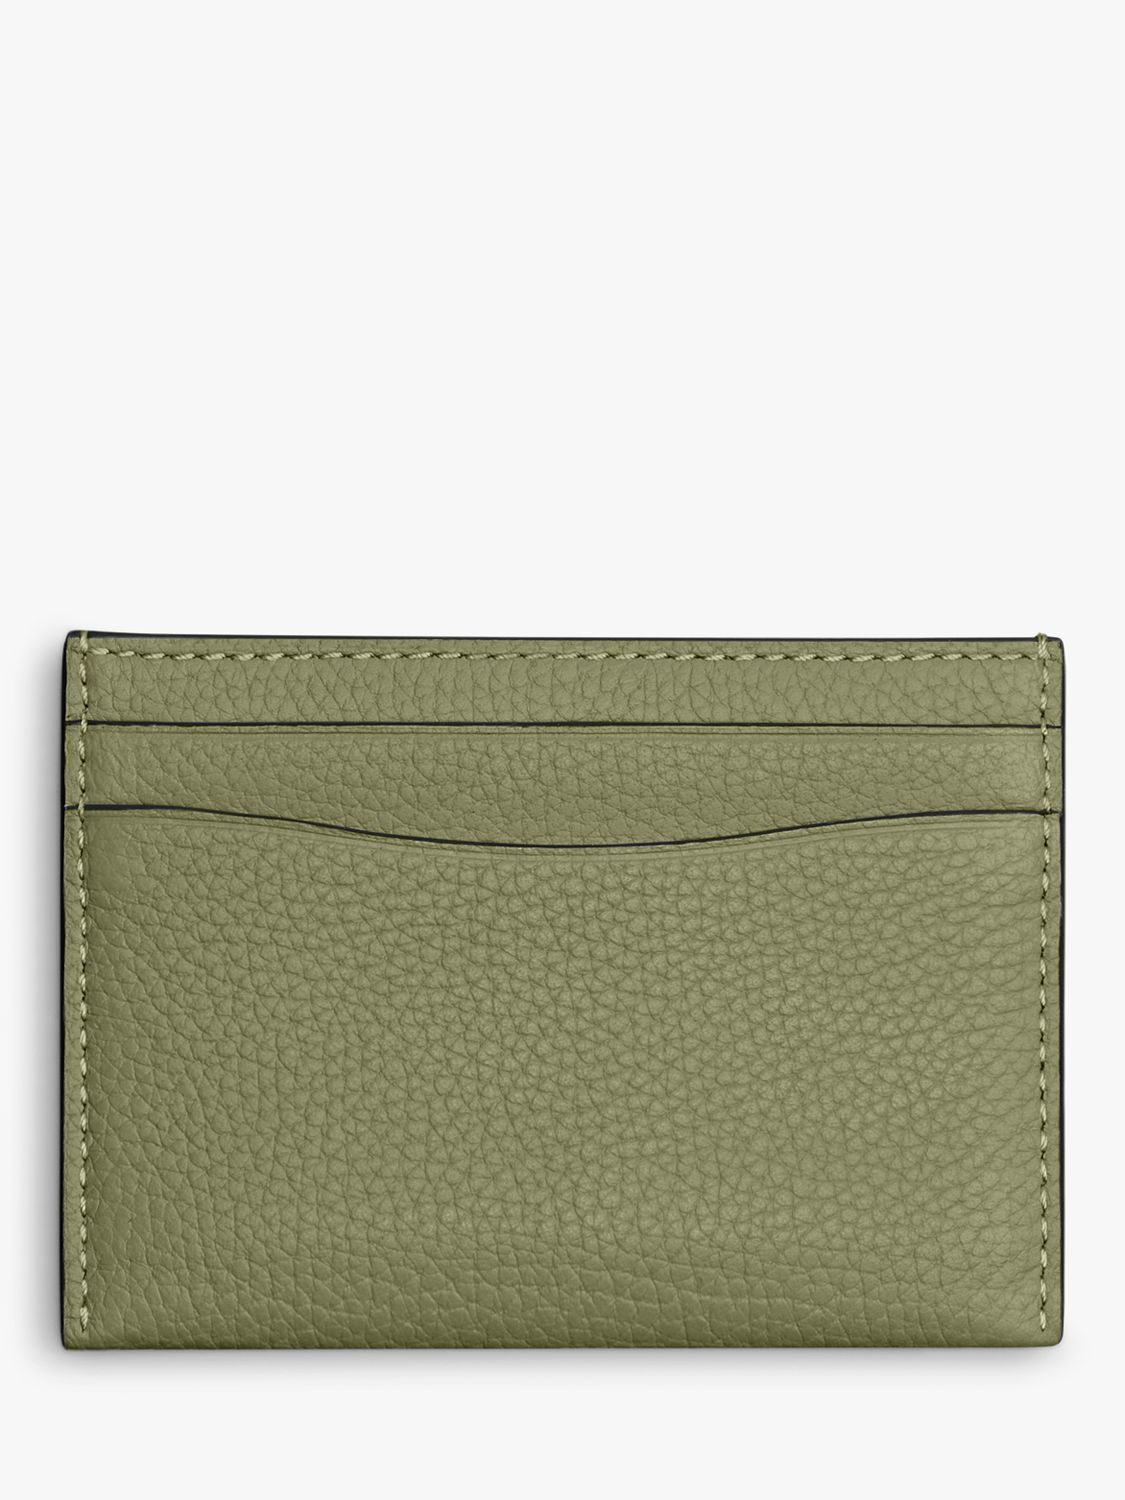 Buy Coach Pebble Leather Card Case, Moss Online at johnlewis.com